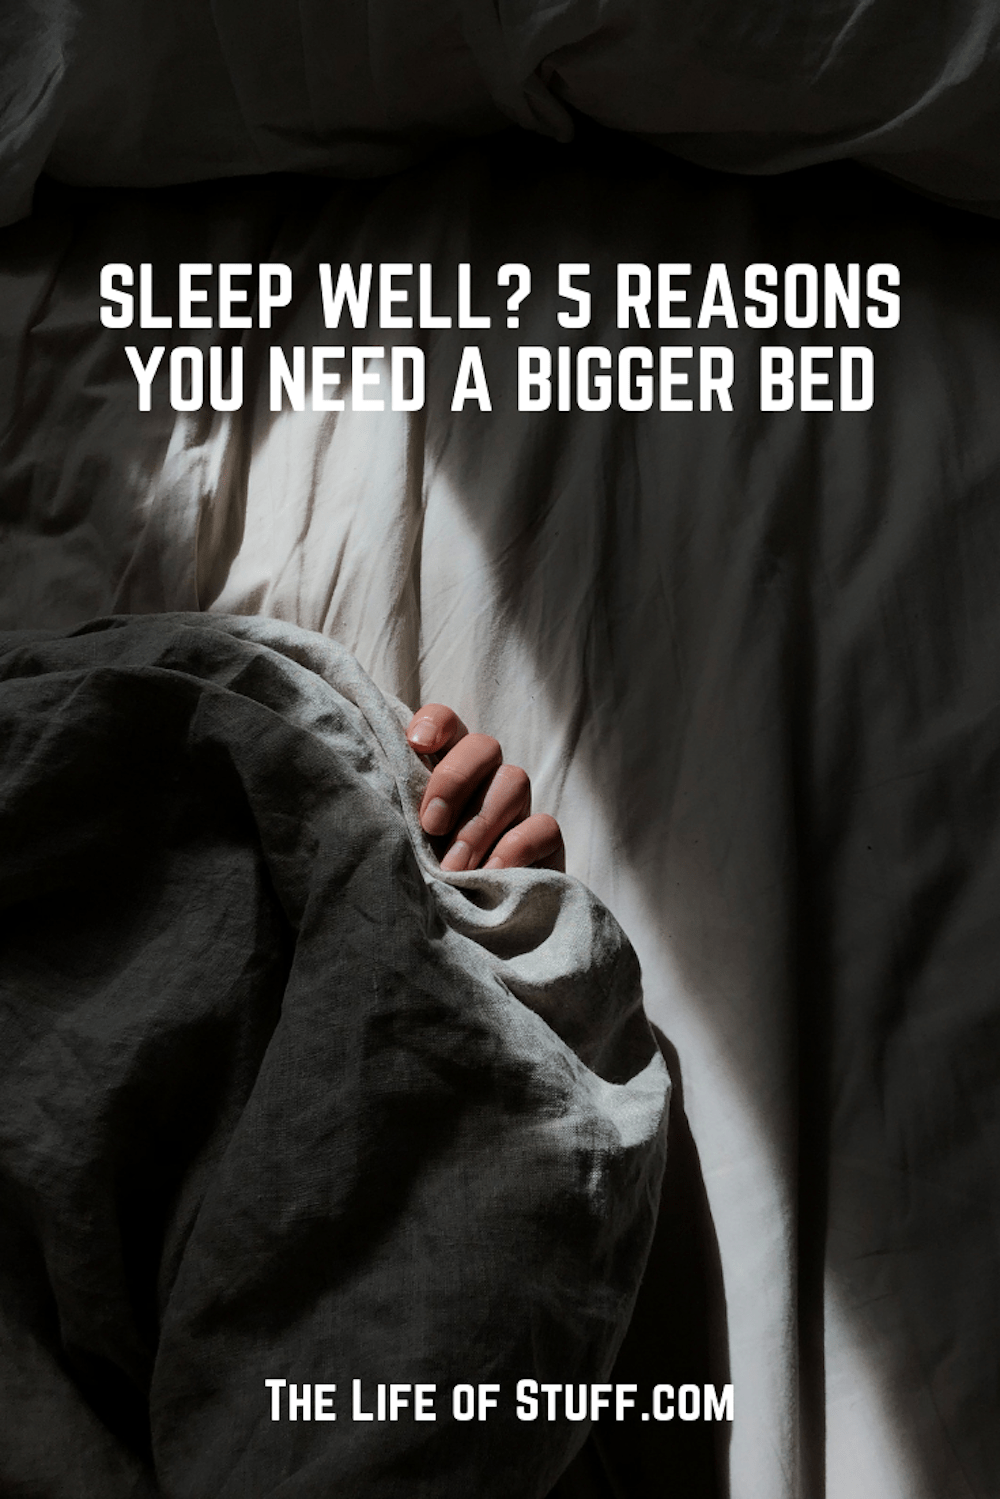 Sleep Well? 5 Reasons You Need A Bigger Bed - The Life of Stuff